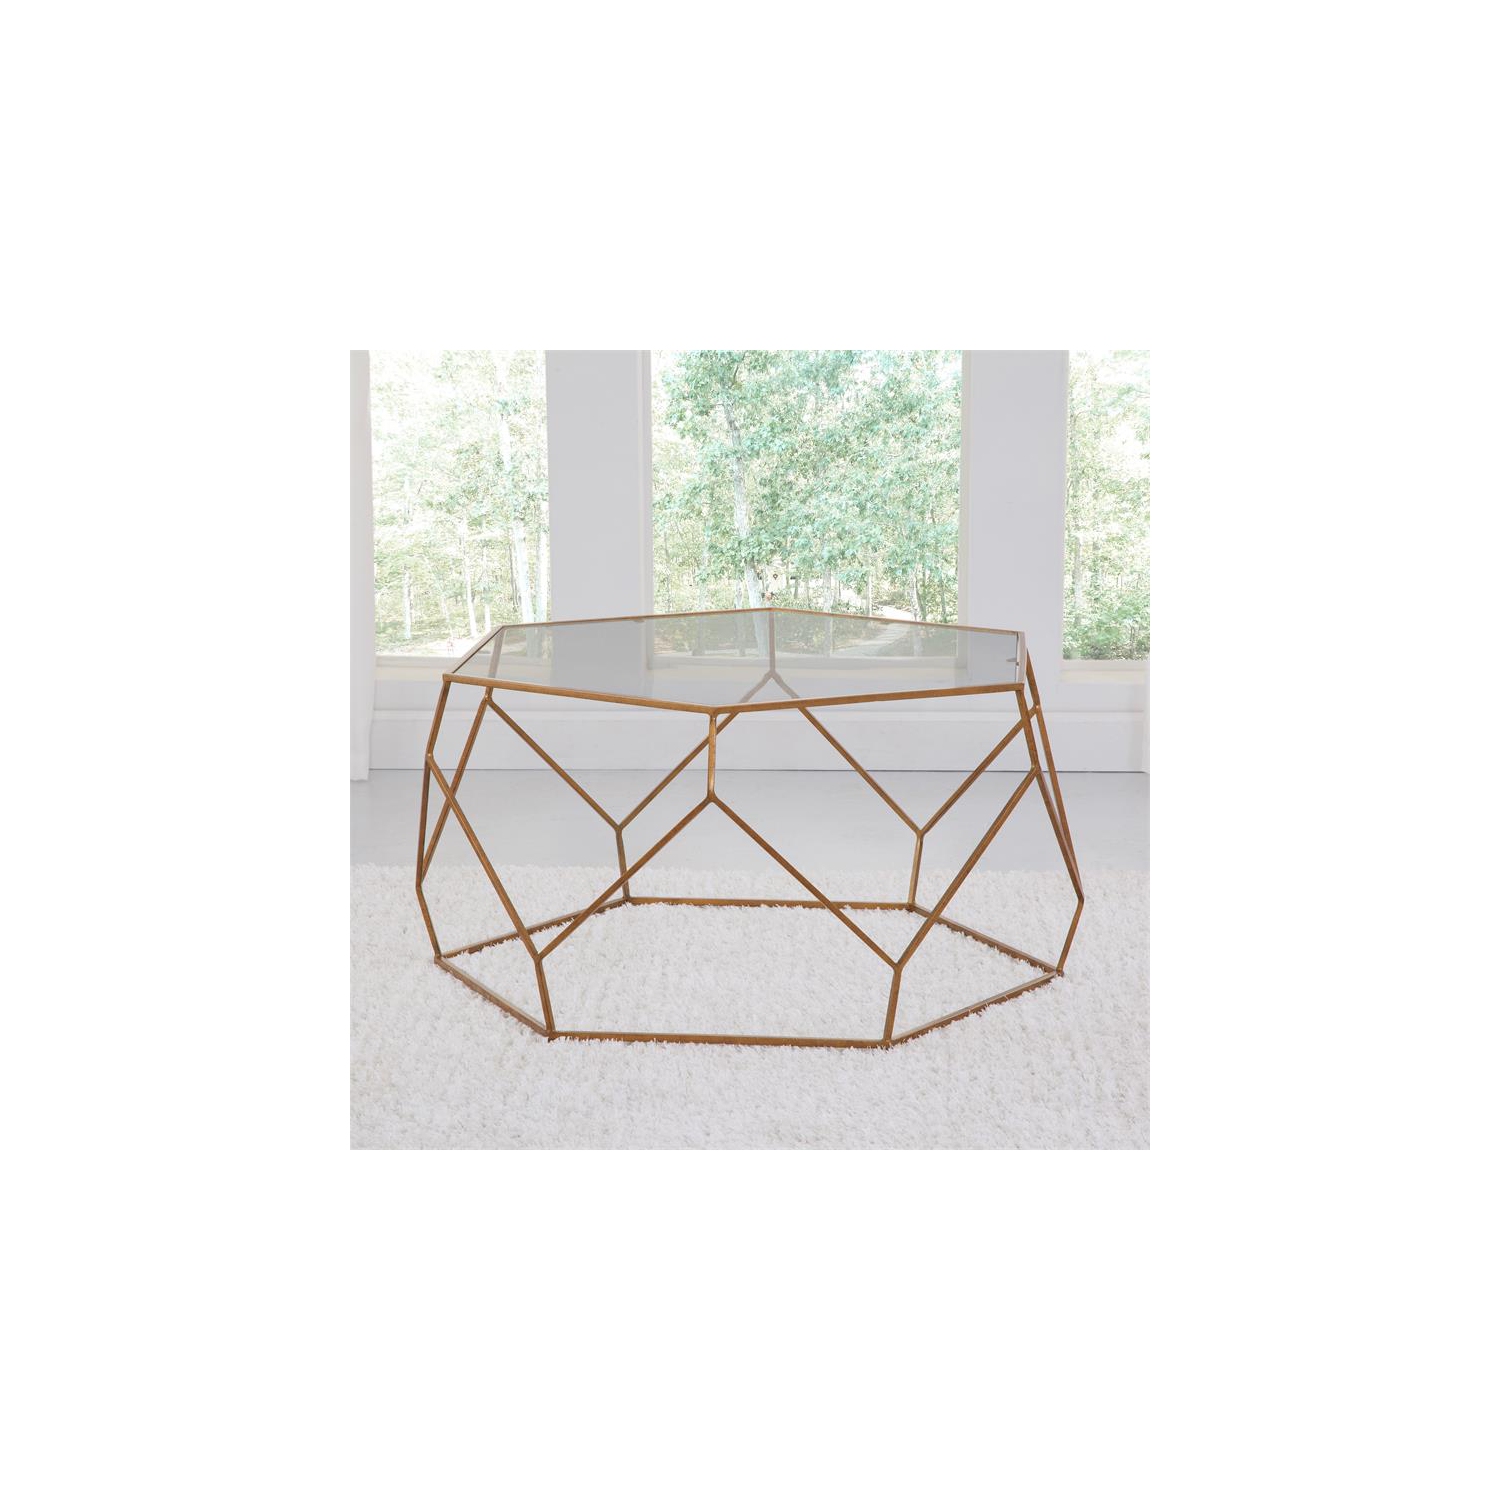 Steve Silver Roxy Hexagonal Clear Glass and Metal Cocktail Table